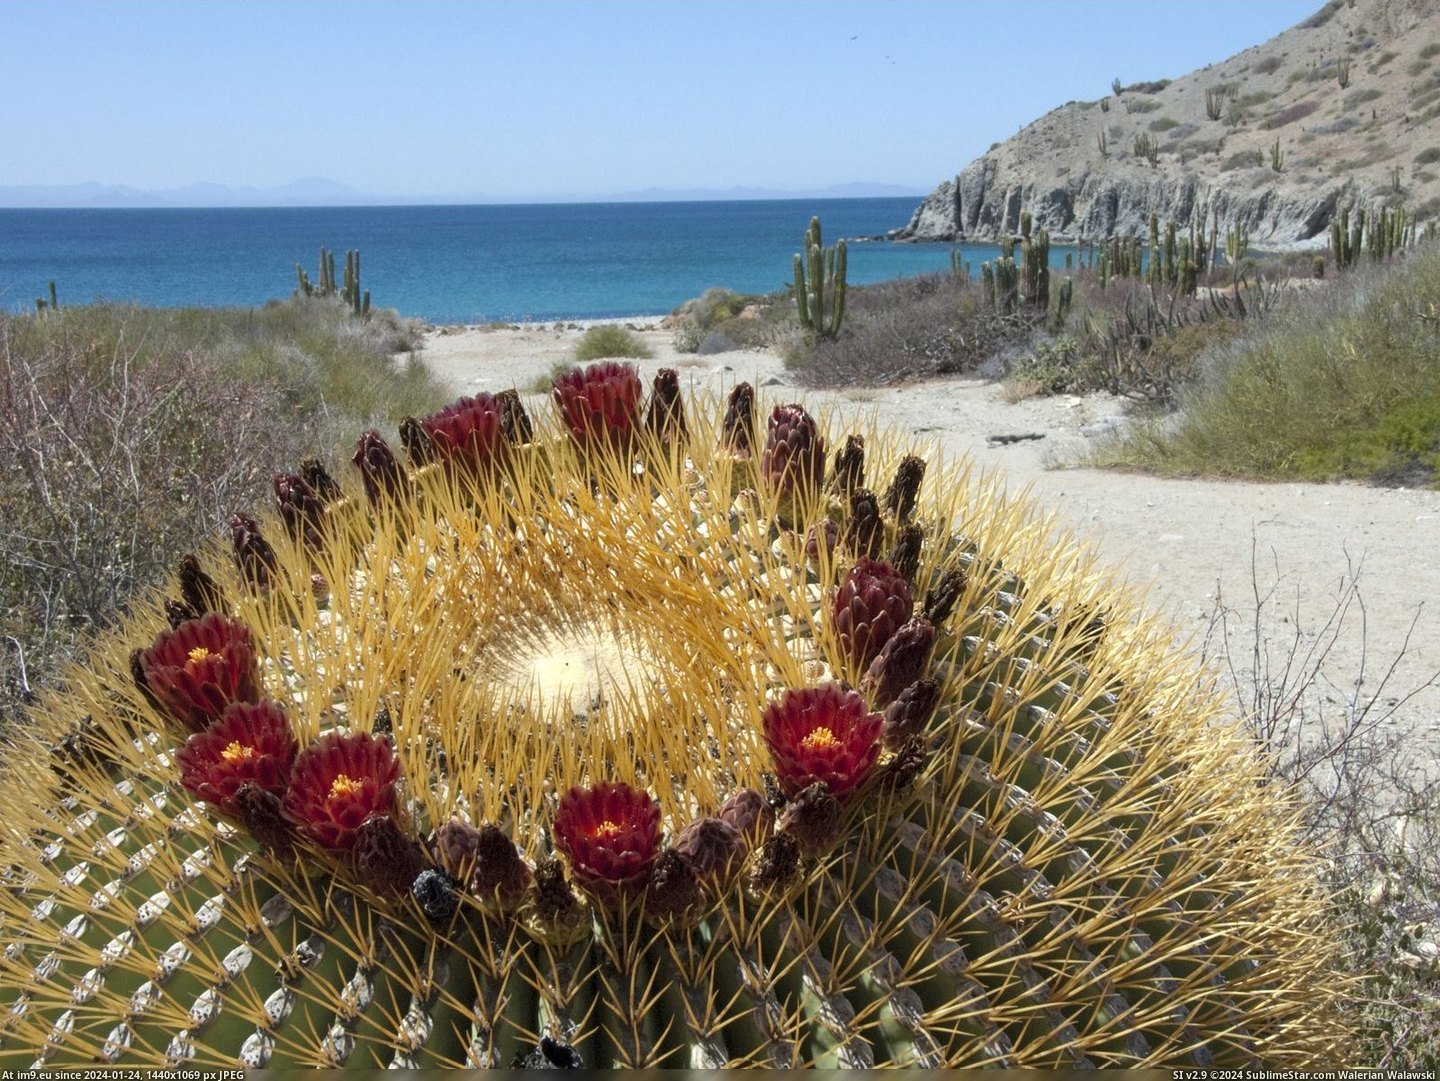 Giant Barrel Cactus, Catalina Island, Gulf of California, Mexico (in Beautiful photos and wallpapers)